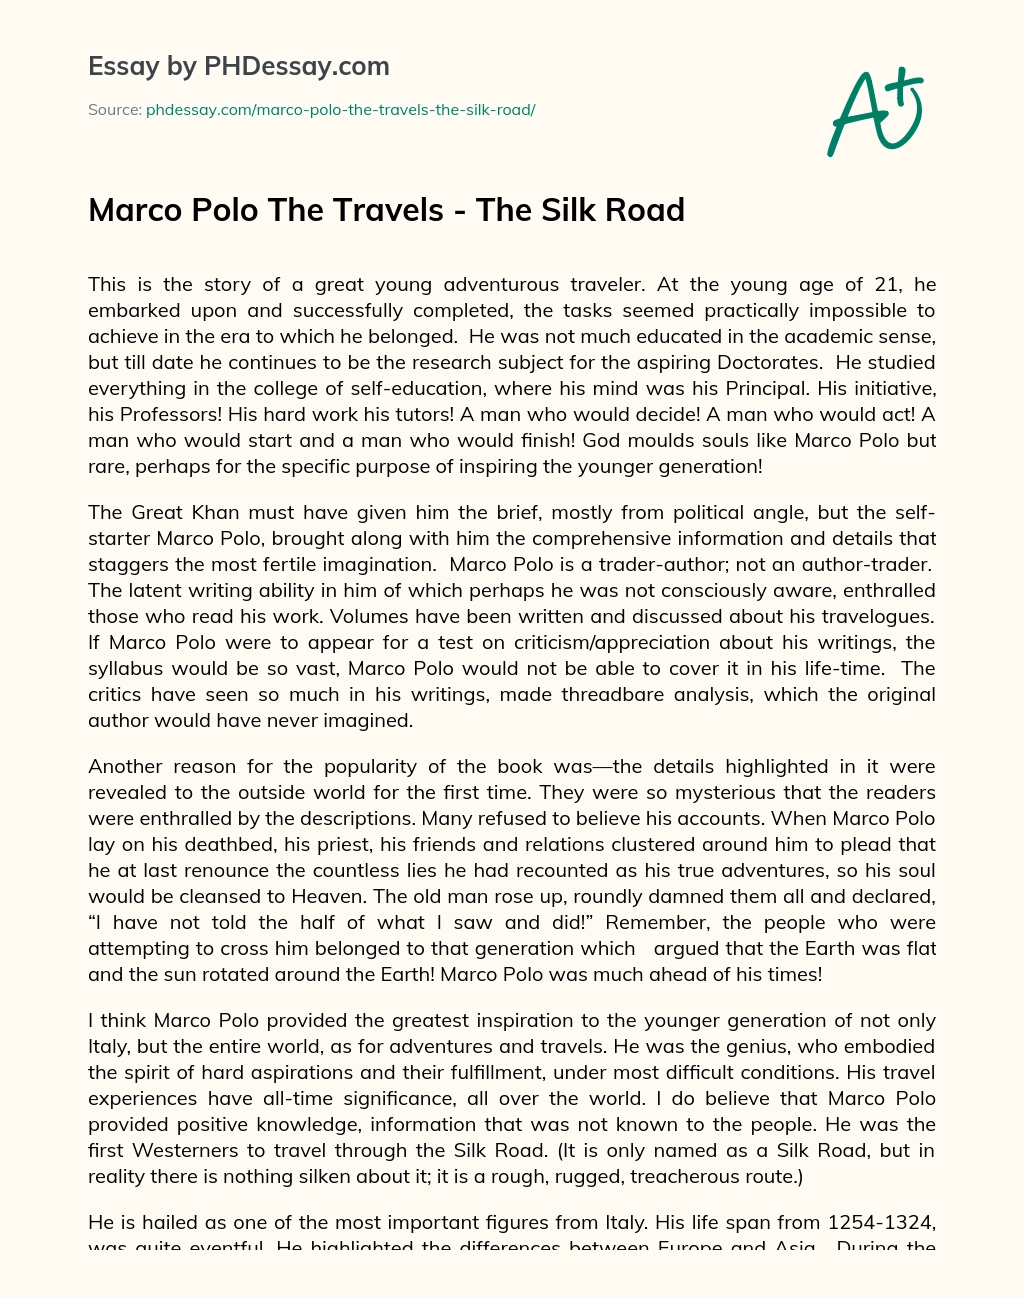 Marco Polo The Travels – The Silk Road essay